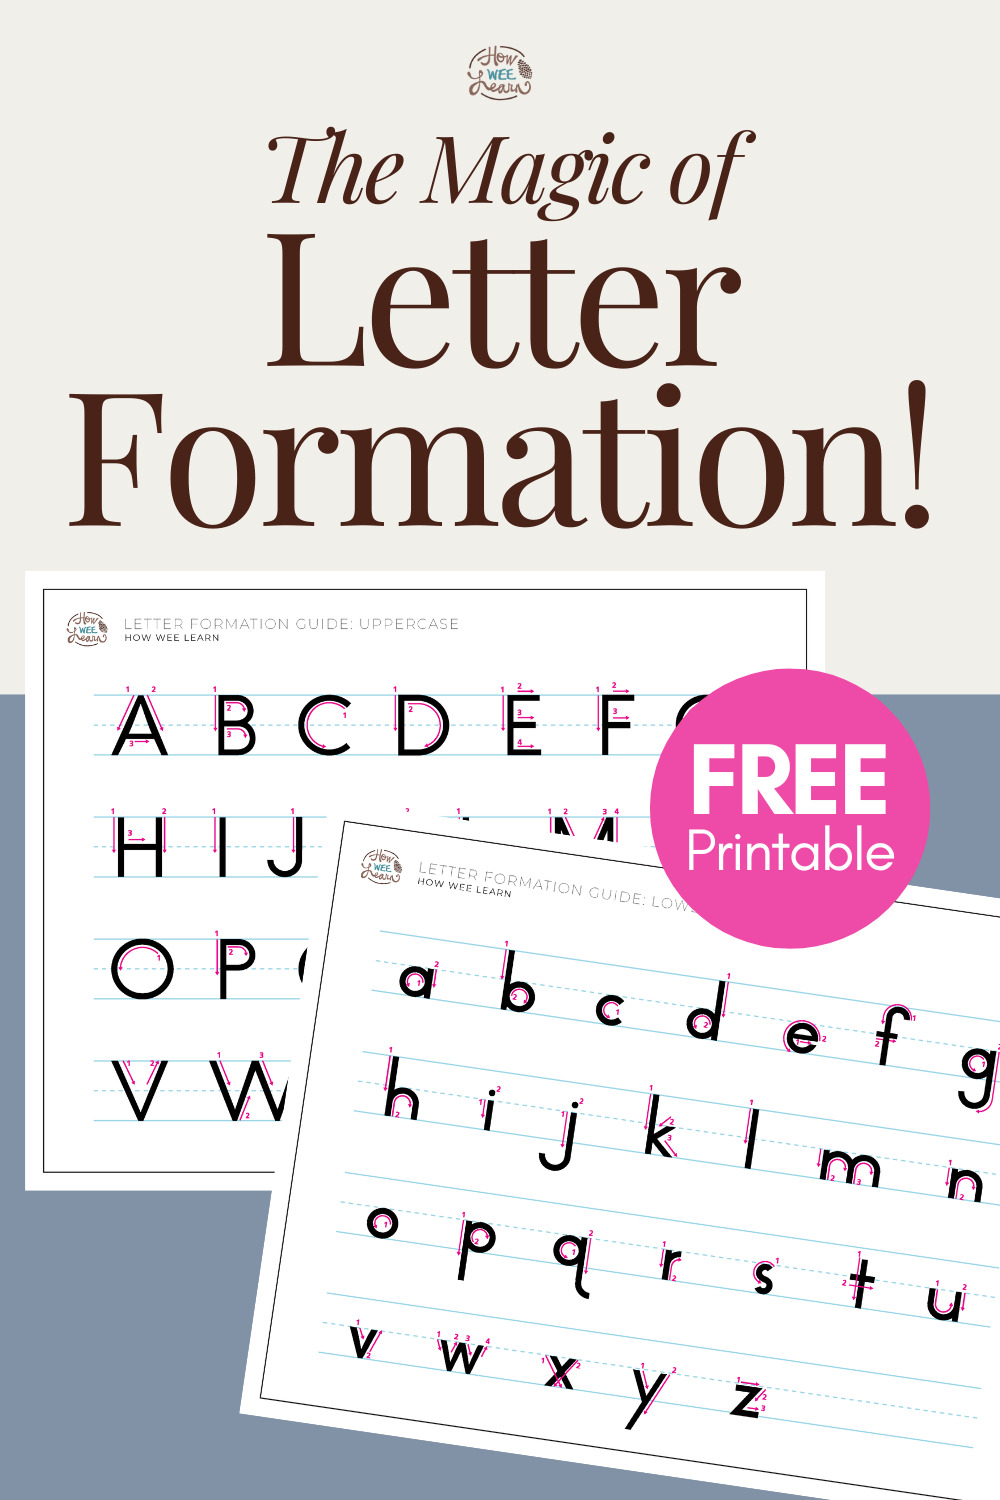 The Magic of Letter Formation: Free Printable